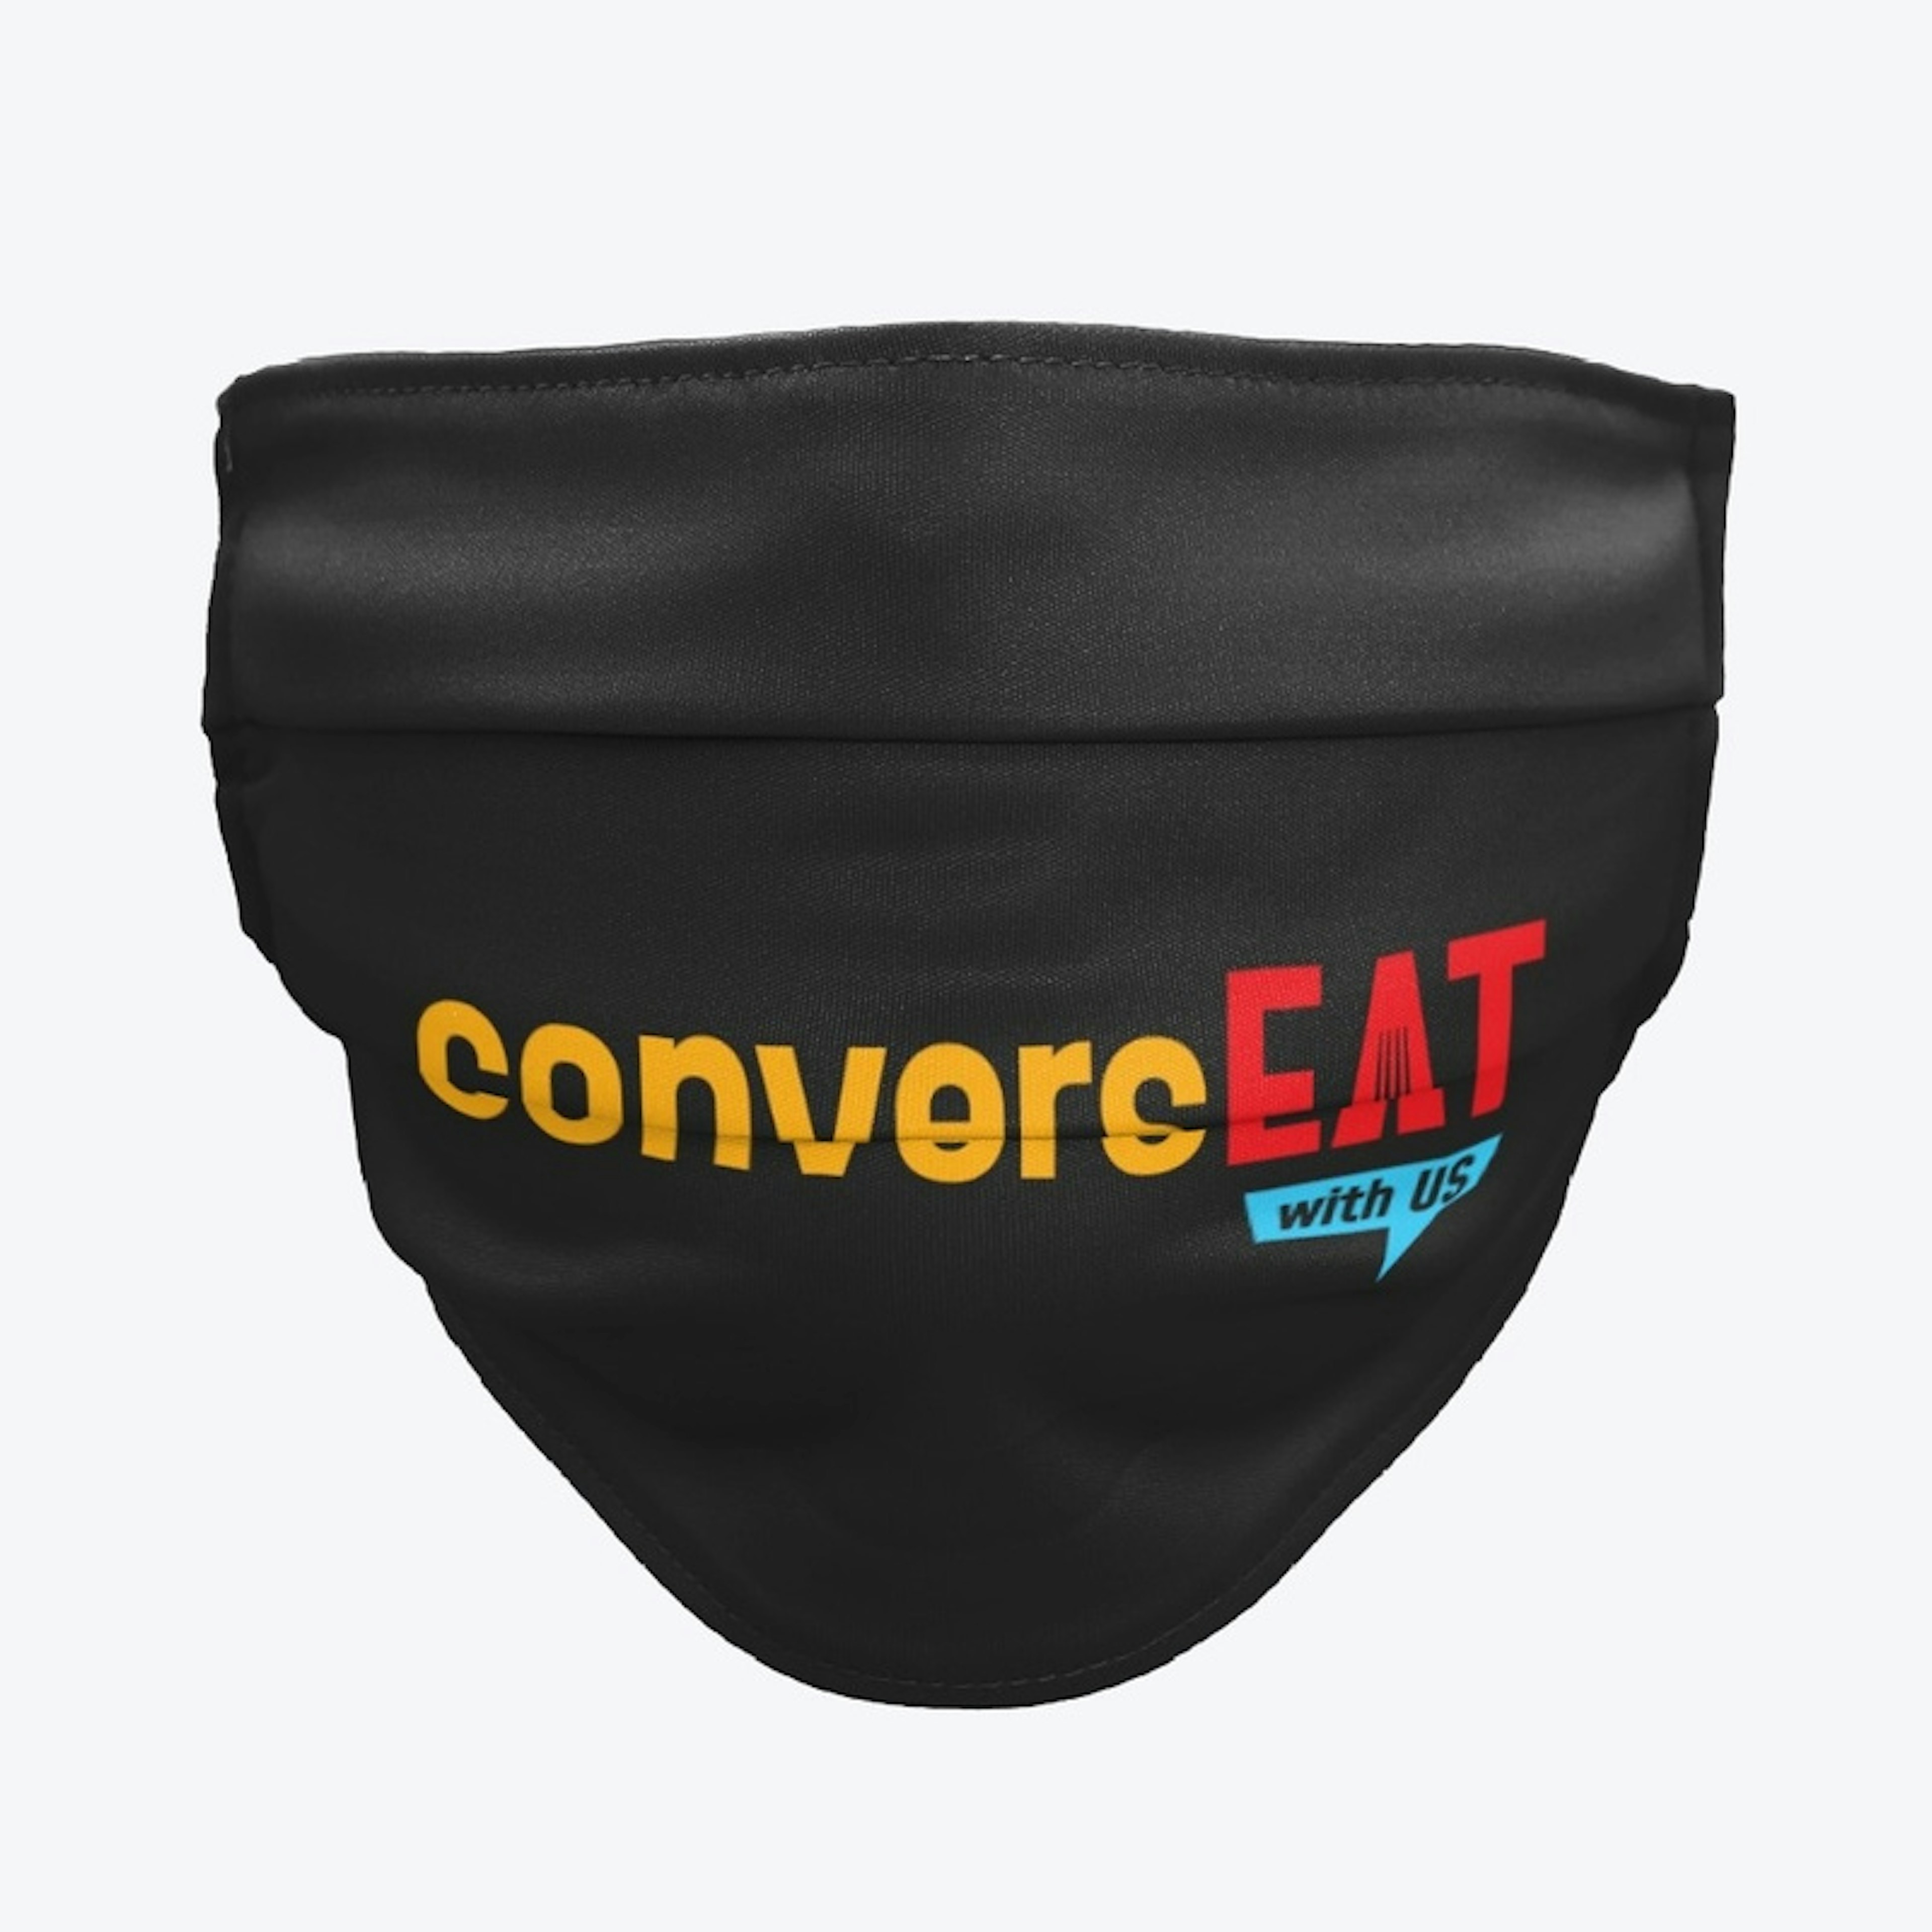 ConversEAT with US